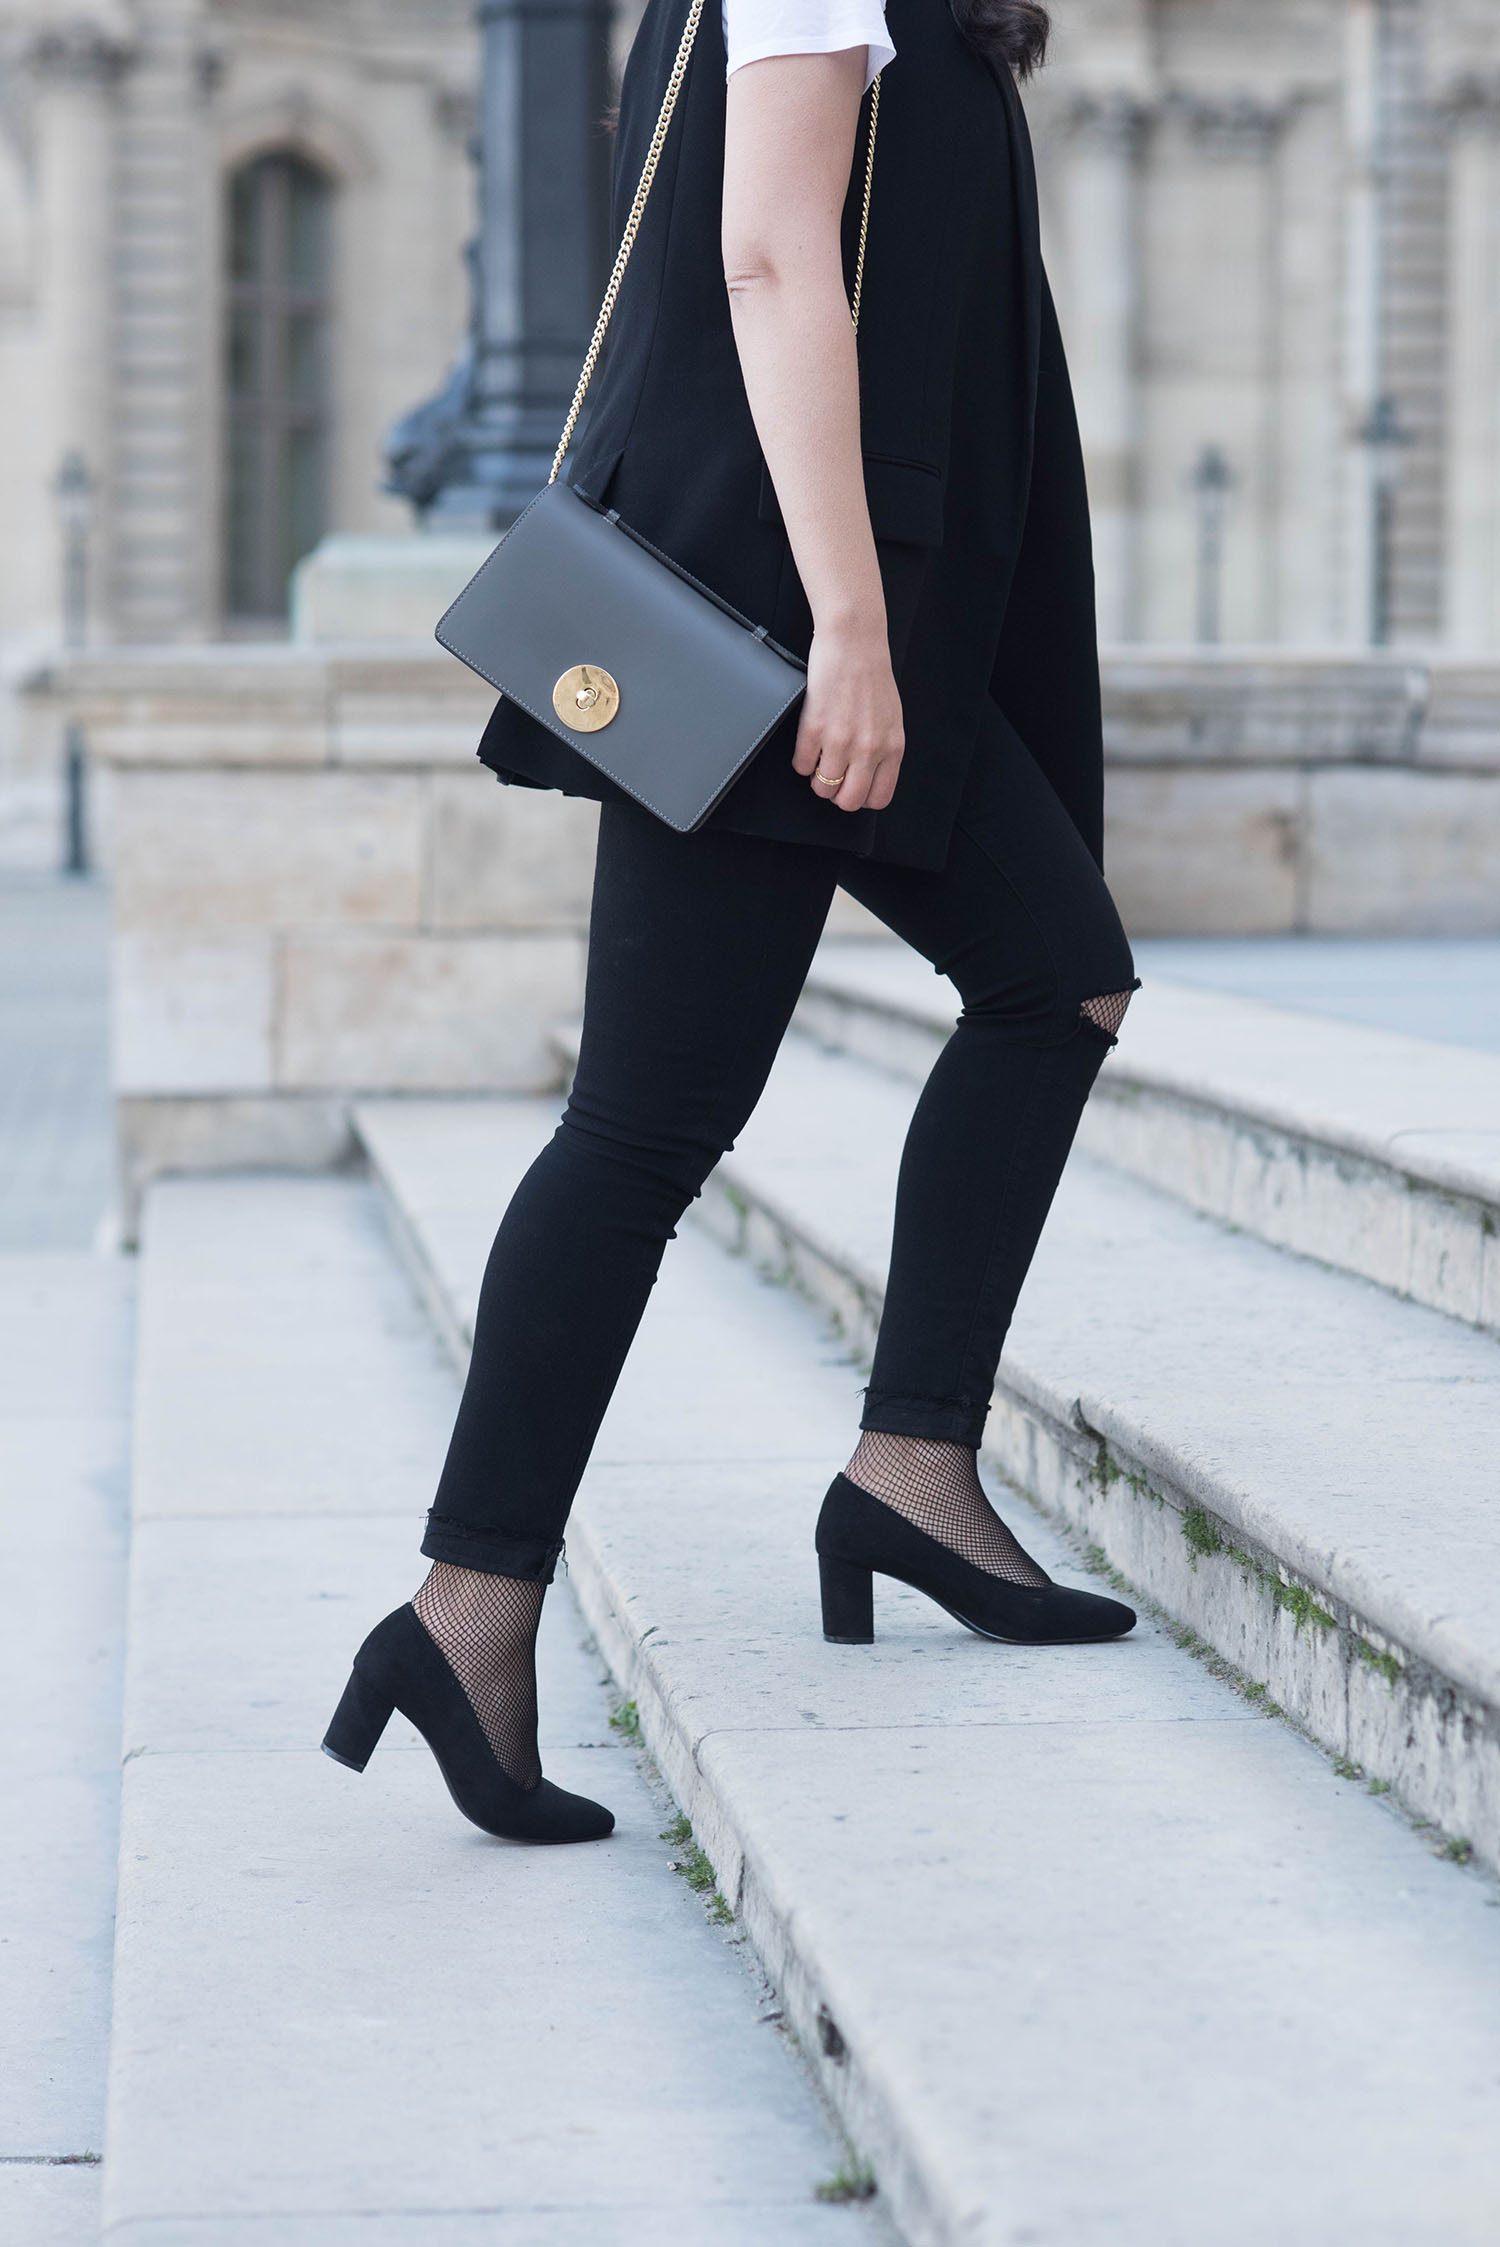 Outfit details on fashion blogger Cee Fardoe of Coco & Vera, including a grey Camelia Roma bag, black paige jeans and H&M block heels